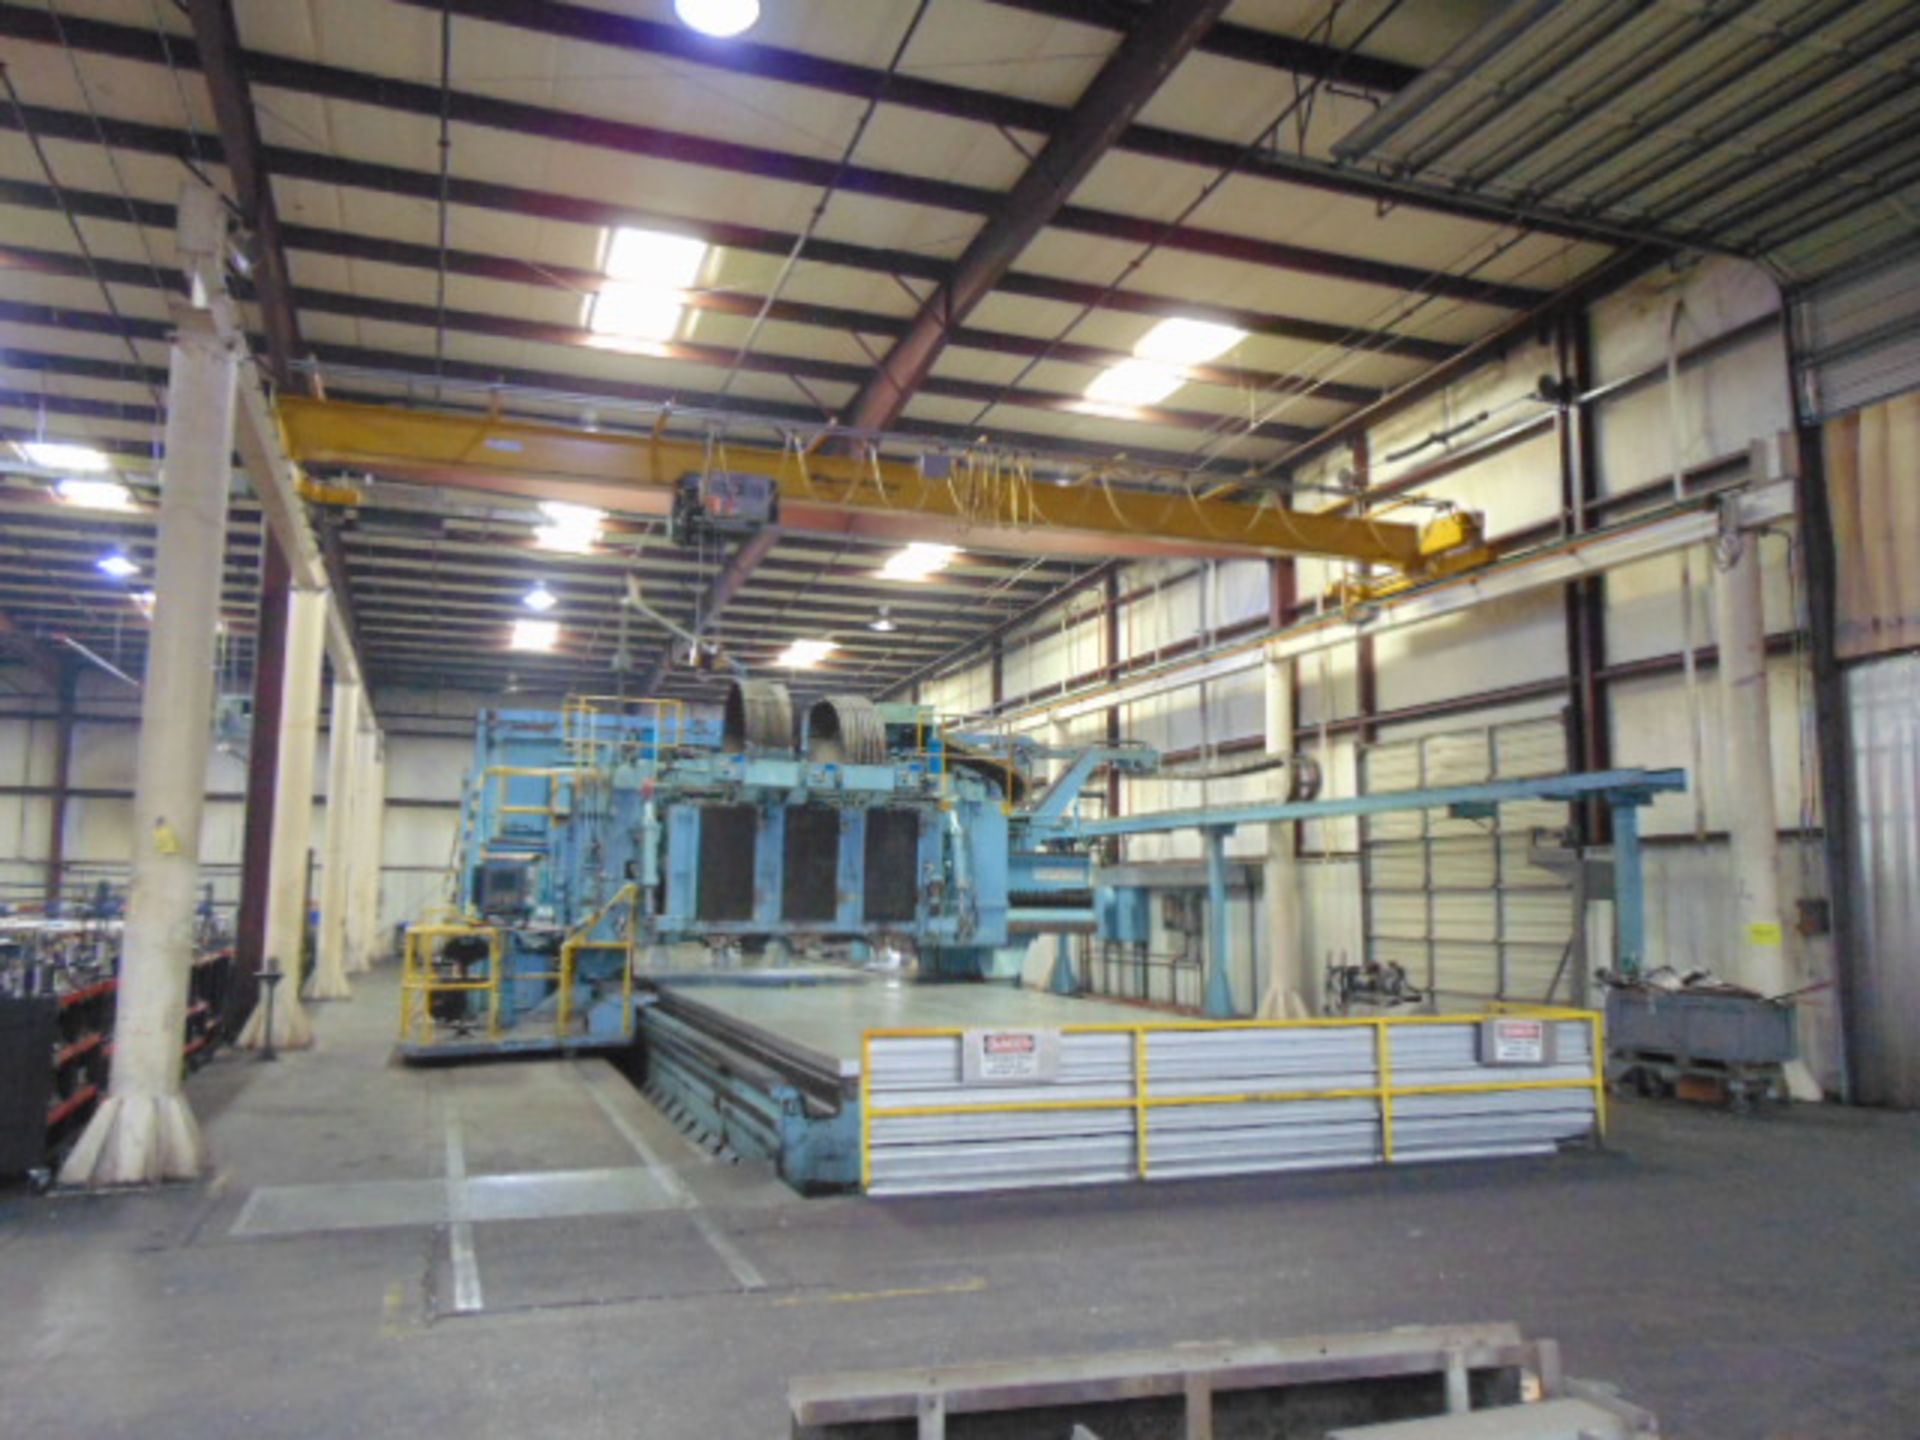 FREE STANDING BRIDGE CRANE SYSTEM, PROSERV ANCHOR 5 T. X 39’-6” SPAN, 103’ overall runway length, - Image 6 of 8